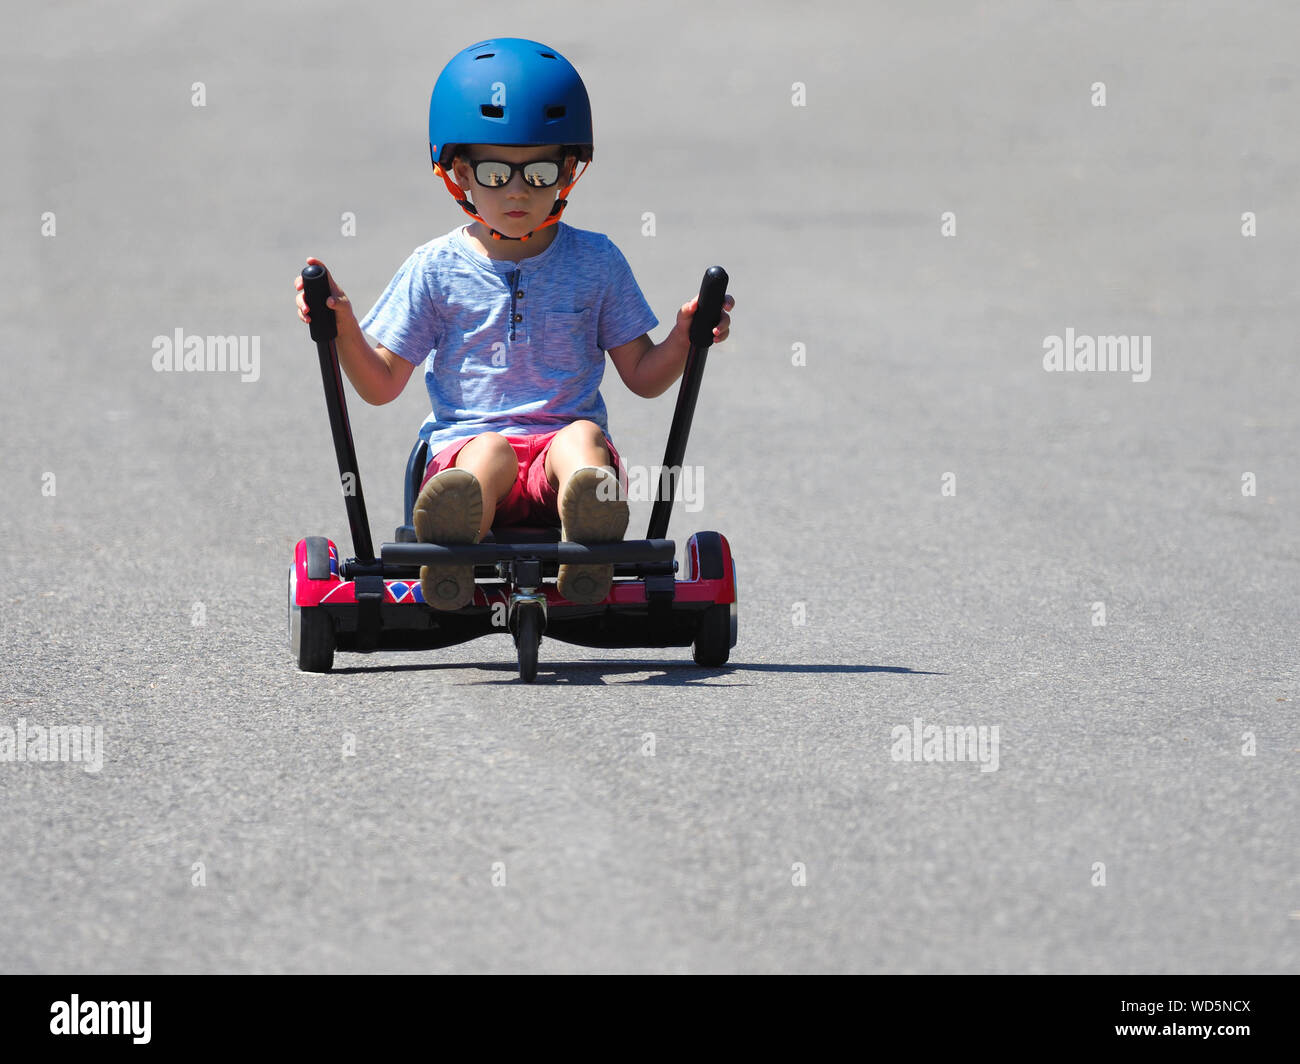 Boy On Segway High Resolution Stock Photography and Images - Alamy